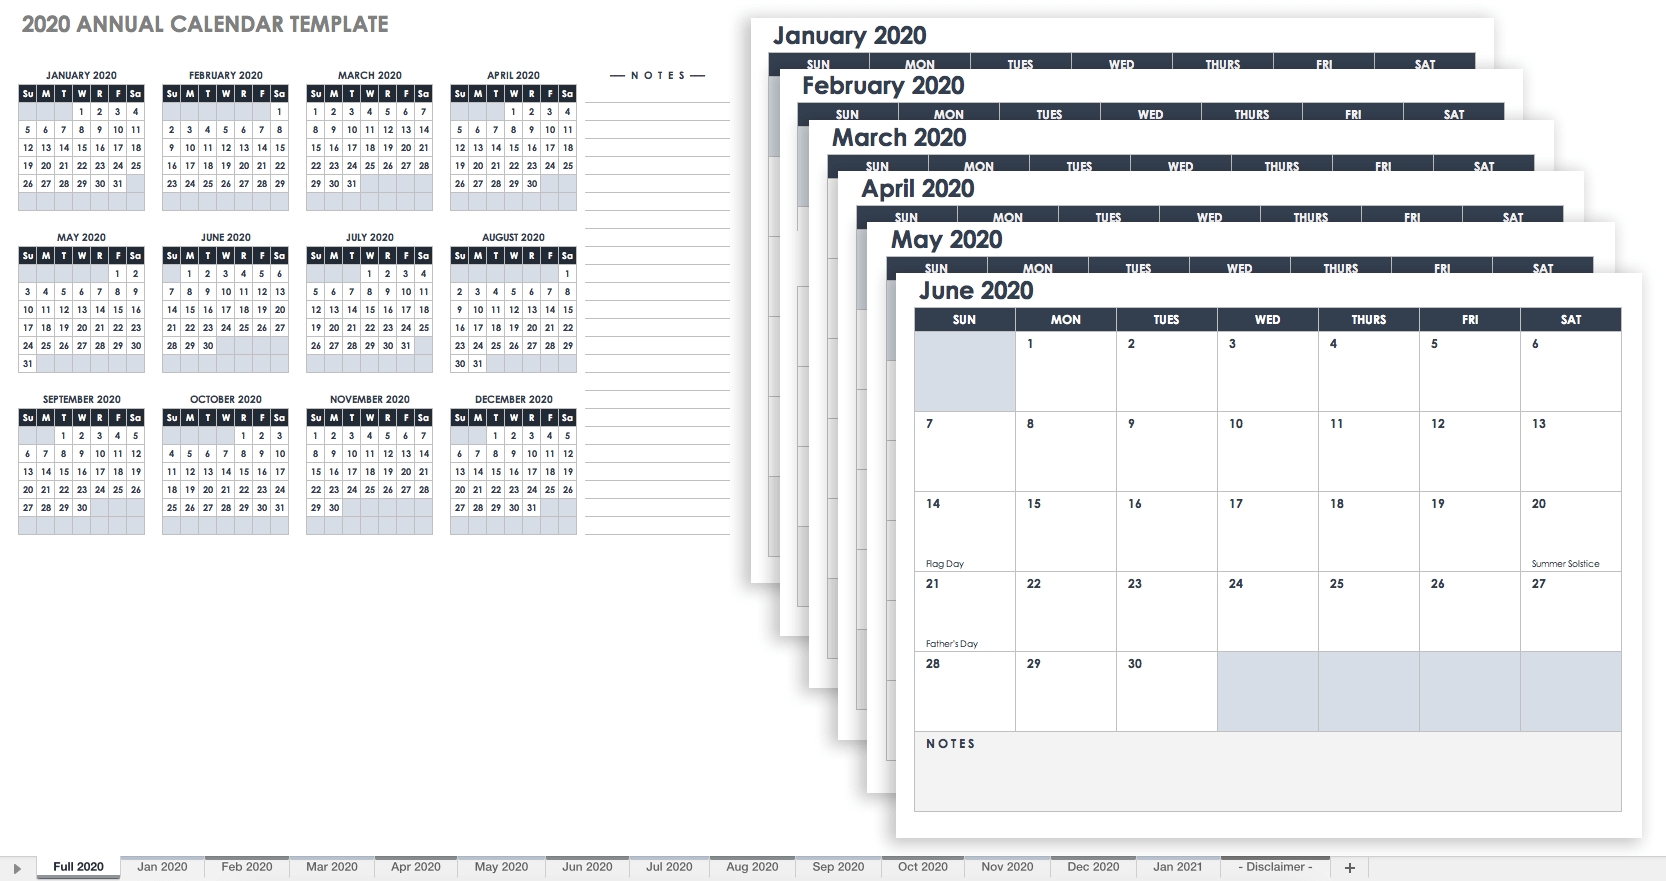 Free Excel Calendar Templates-Excel Calendar Template 2020 6-Month A Page